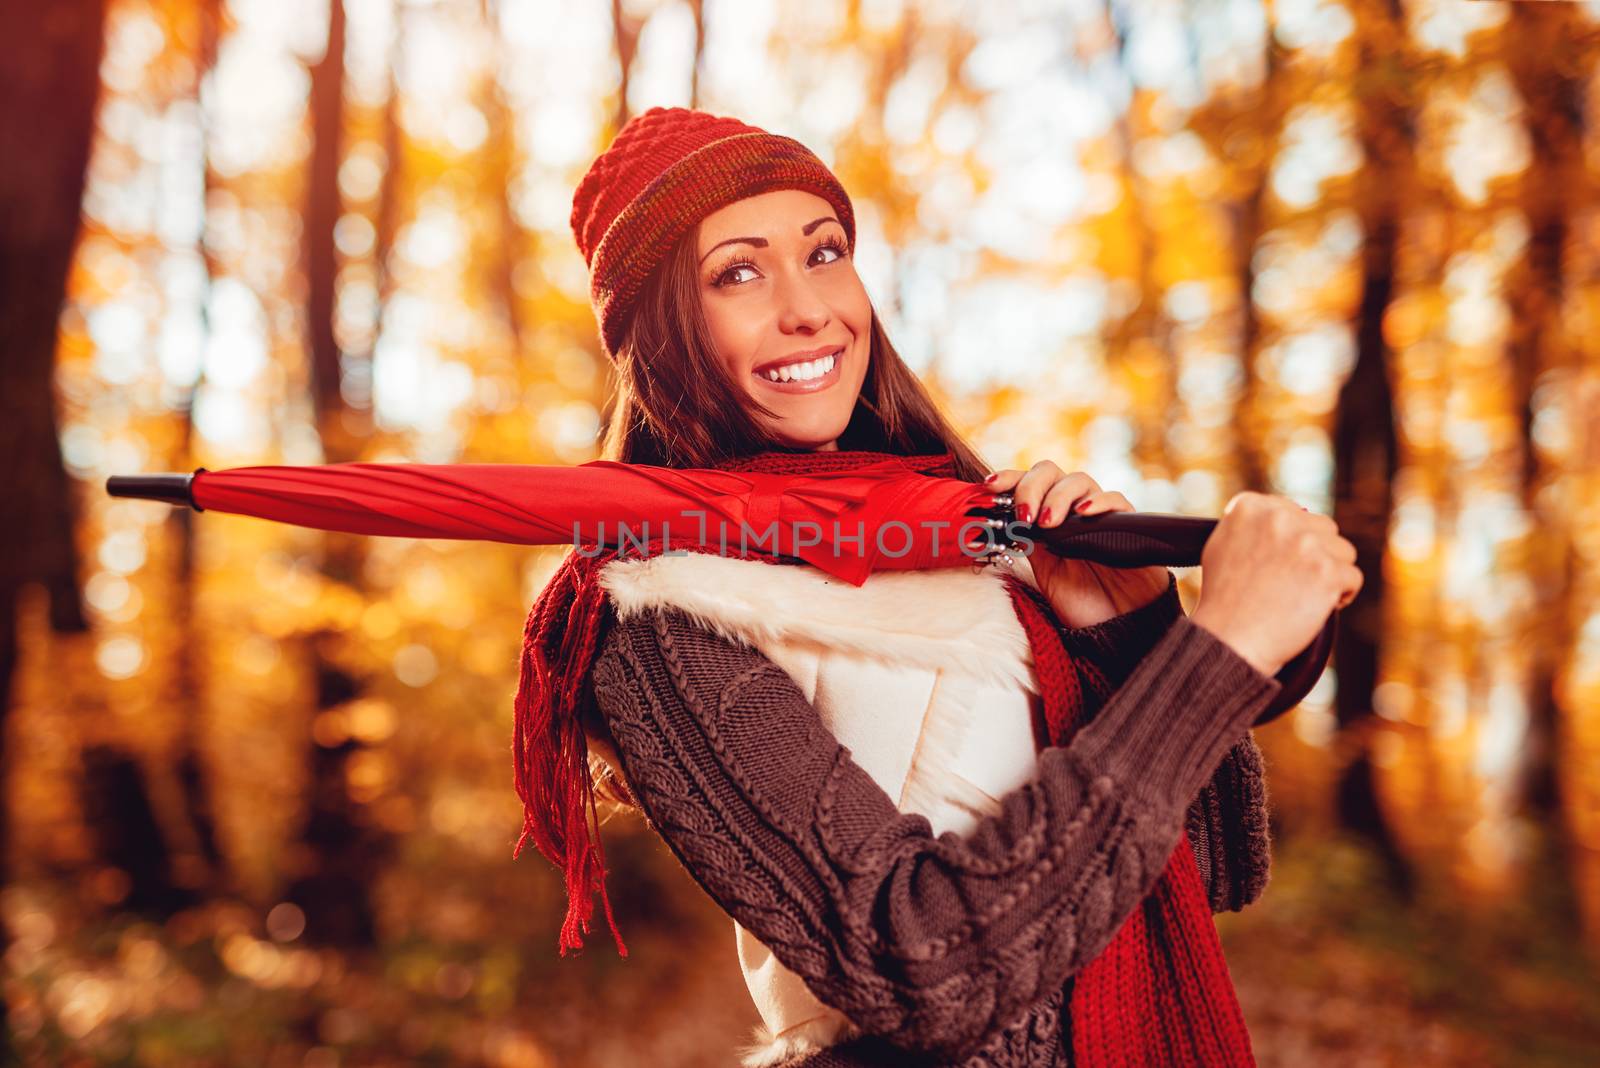 Portrait of a beautiful smiling girl with red umbrella in sunny forest in autumn colors. Pensive looking away.